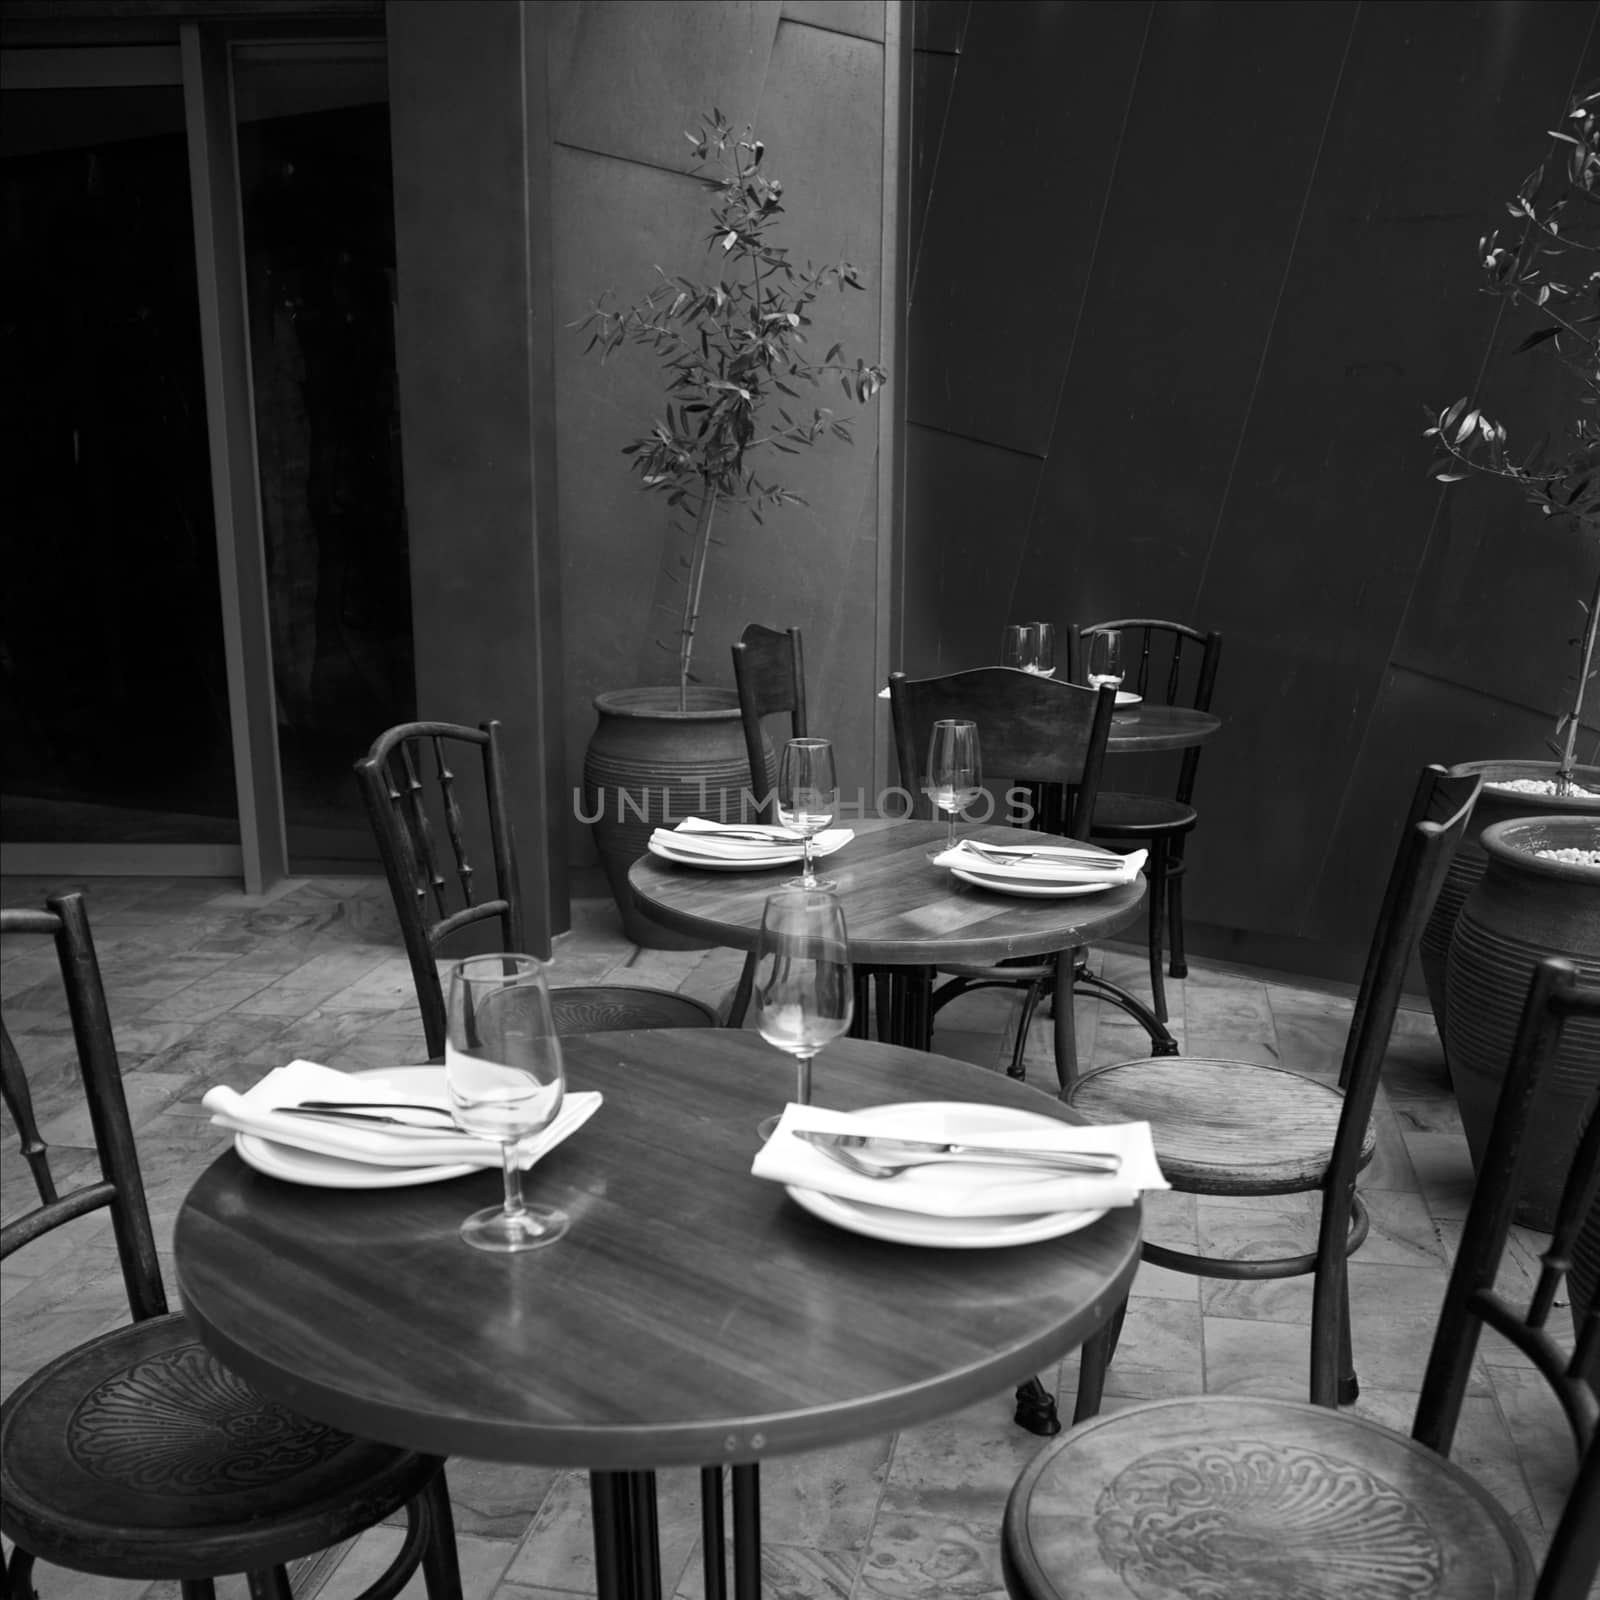 Afternoon setting at a restaurant in monochrome